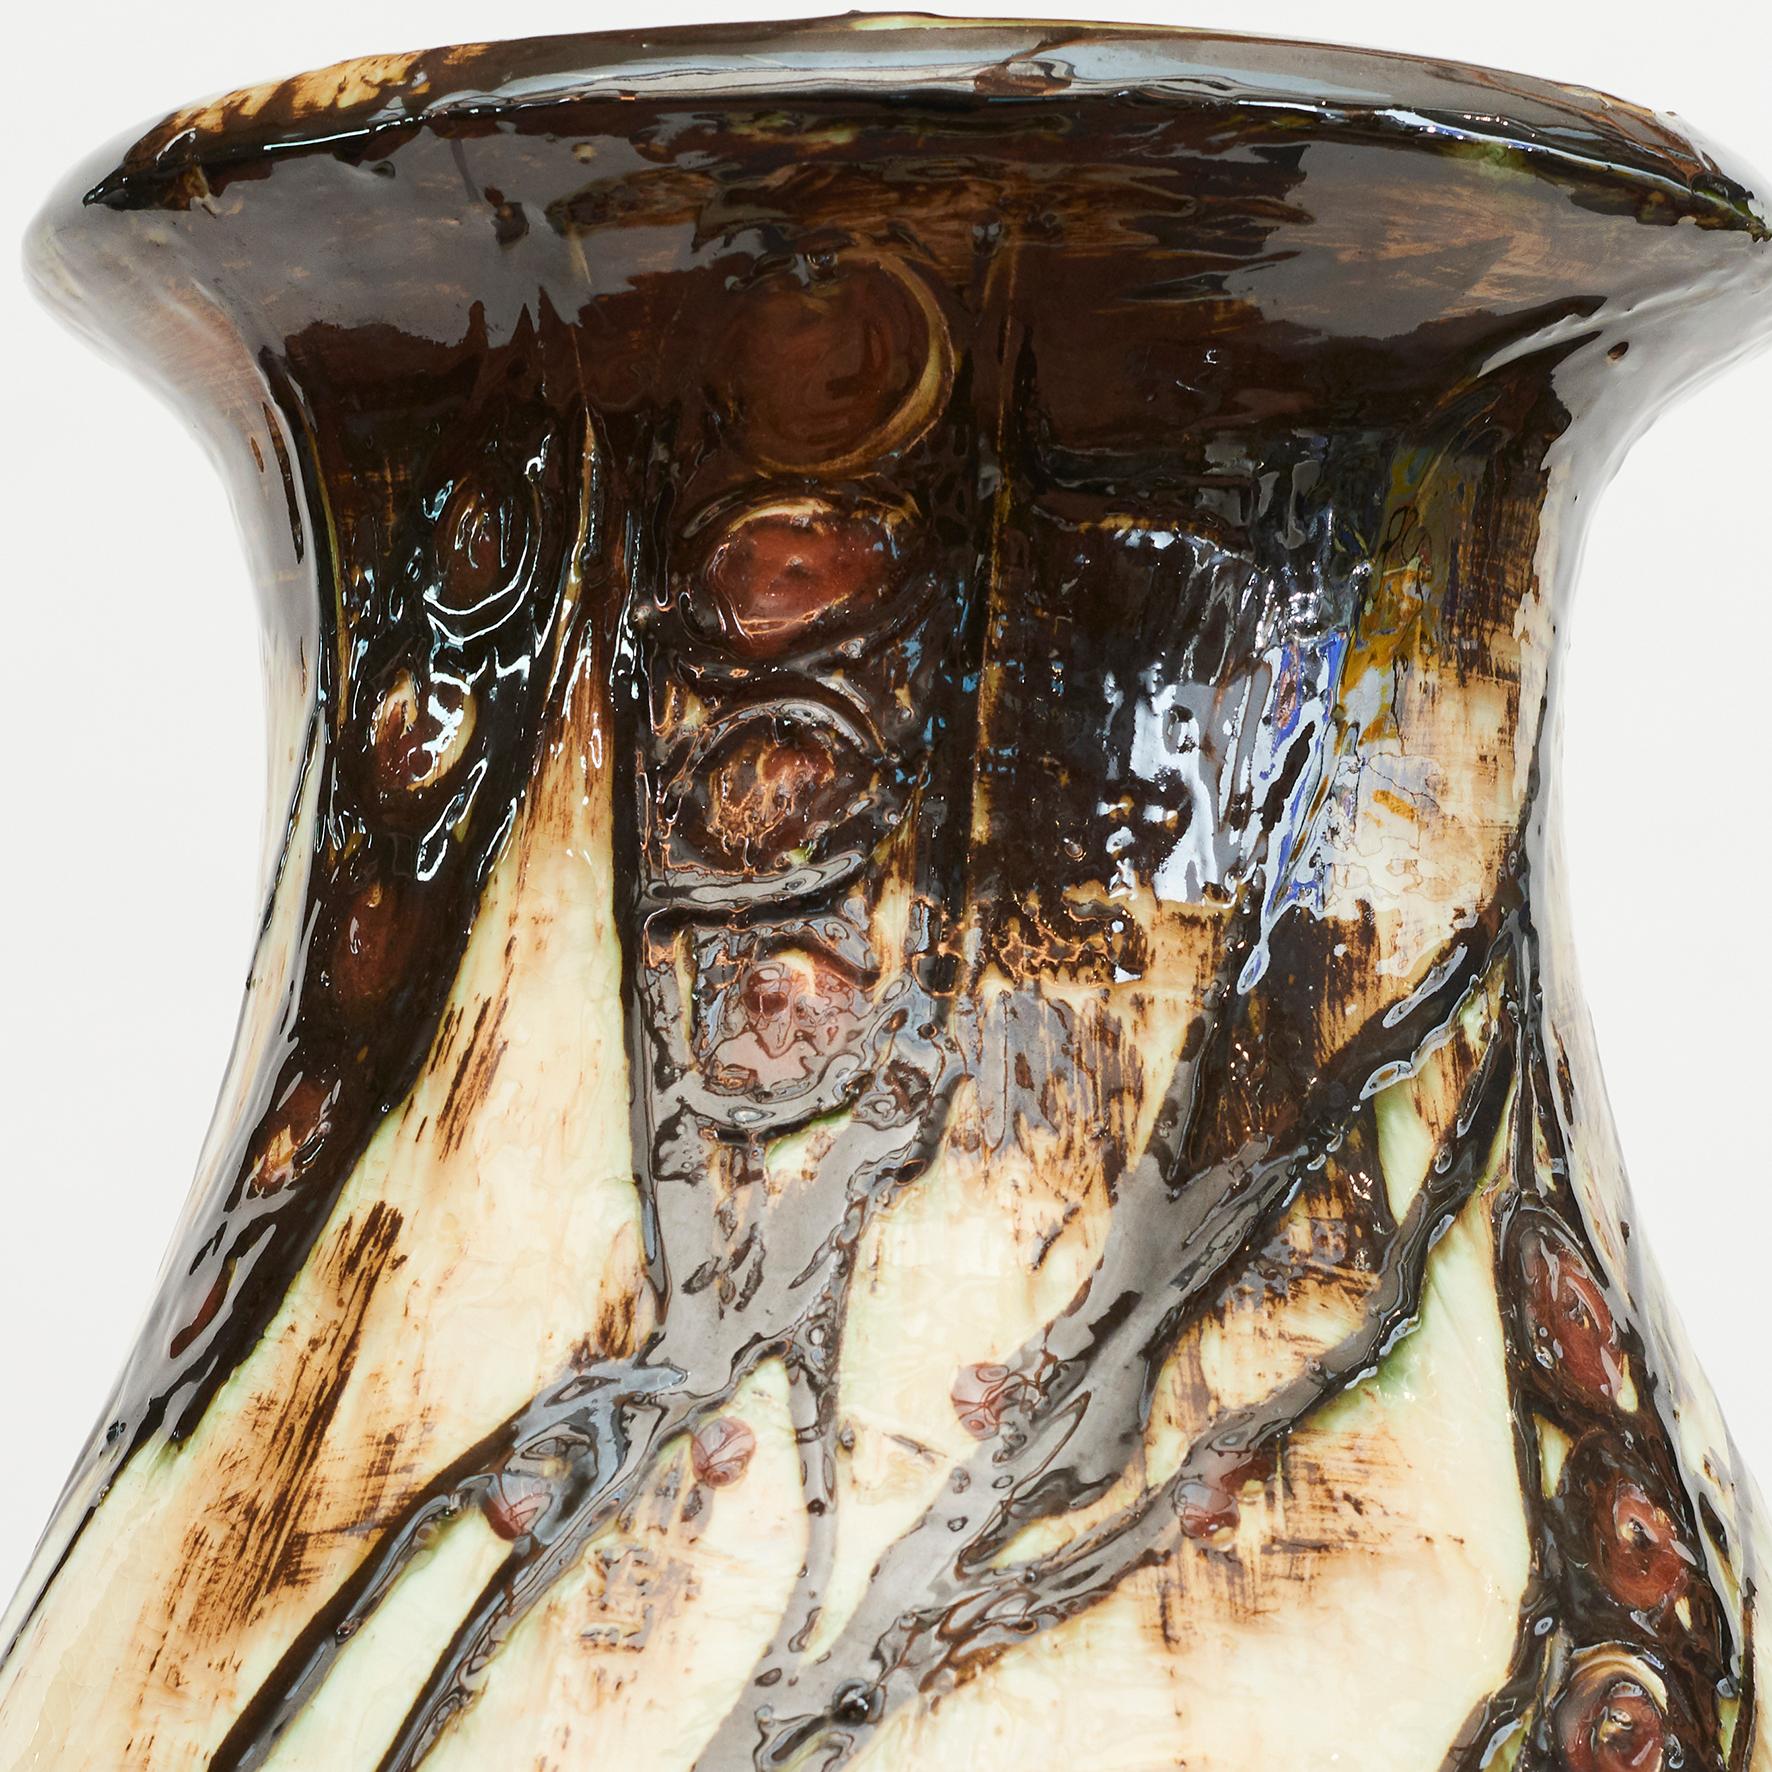 A large unique ceramic vase with an abstract motif, by Danish ceramic studio Herman August Kähler. Beautiful pattern in white and brown colors.
The vase is signed with 'HAK' underneath.